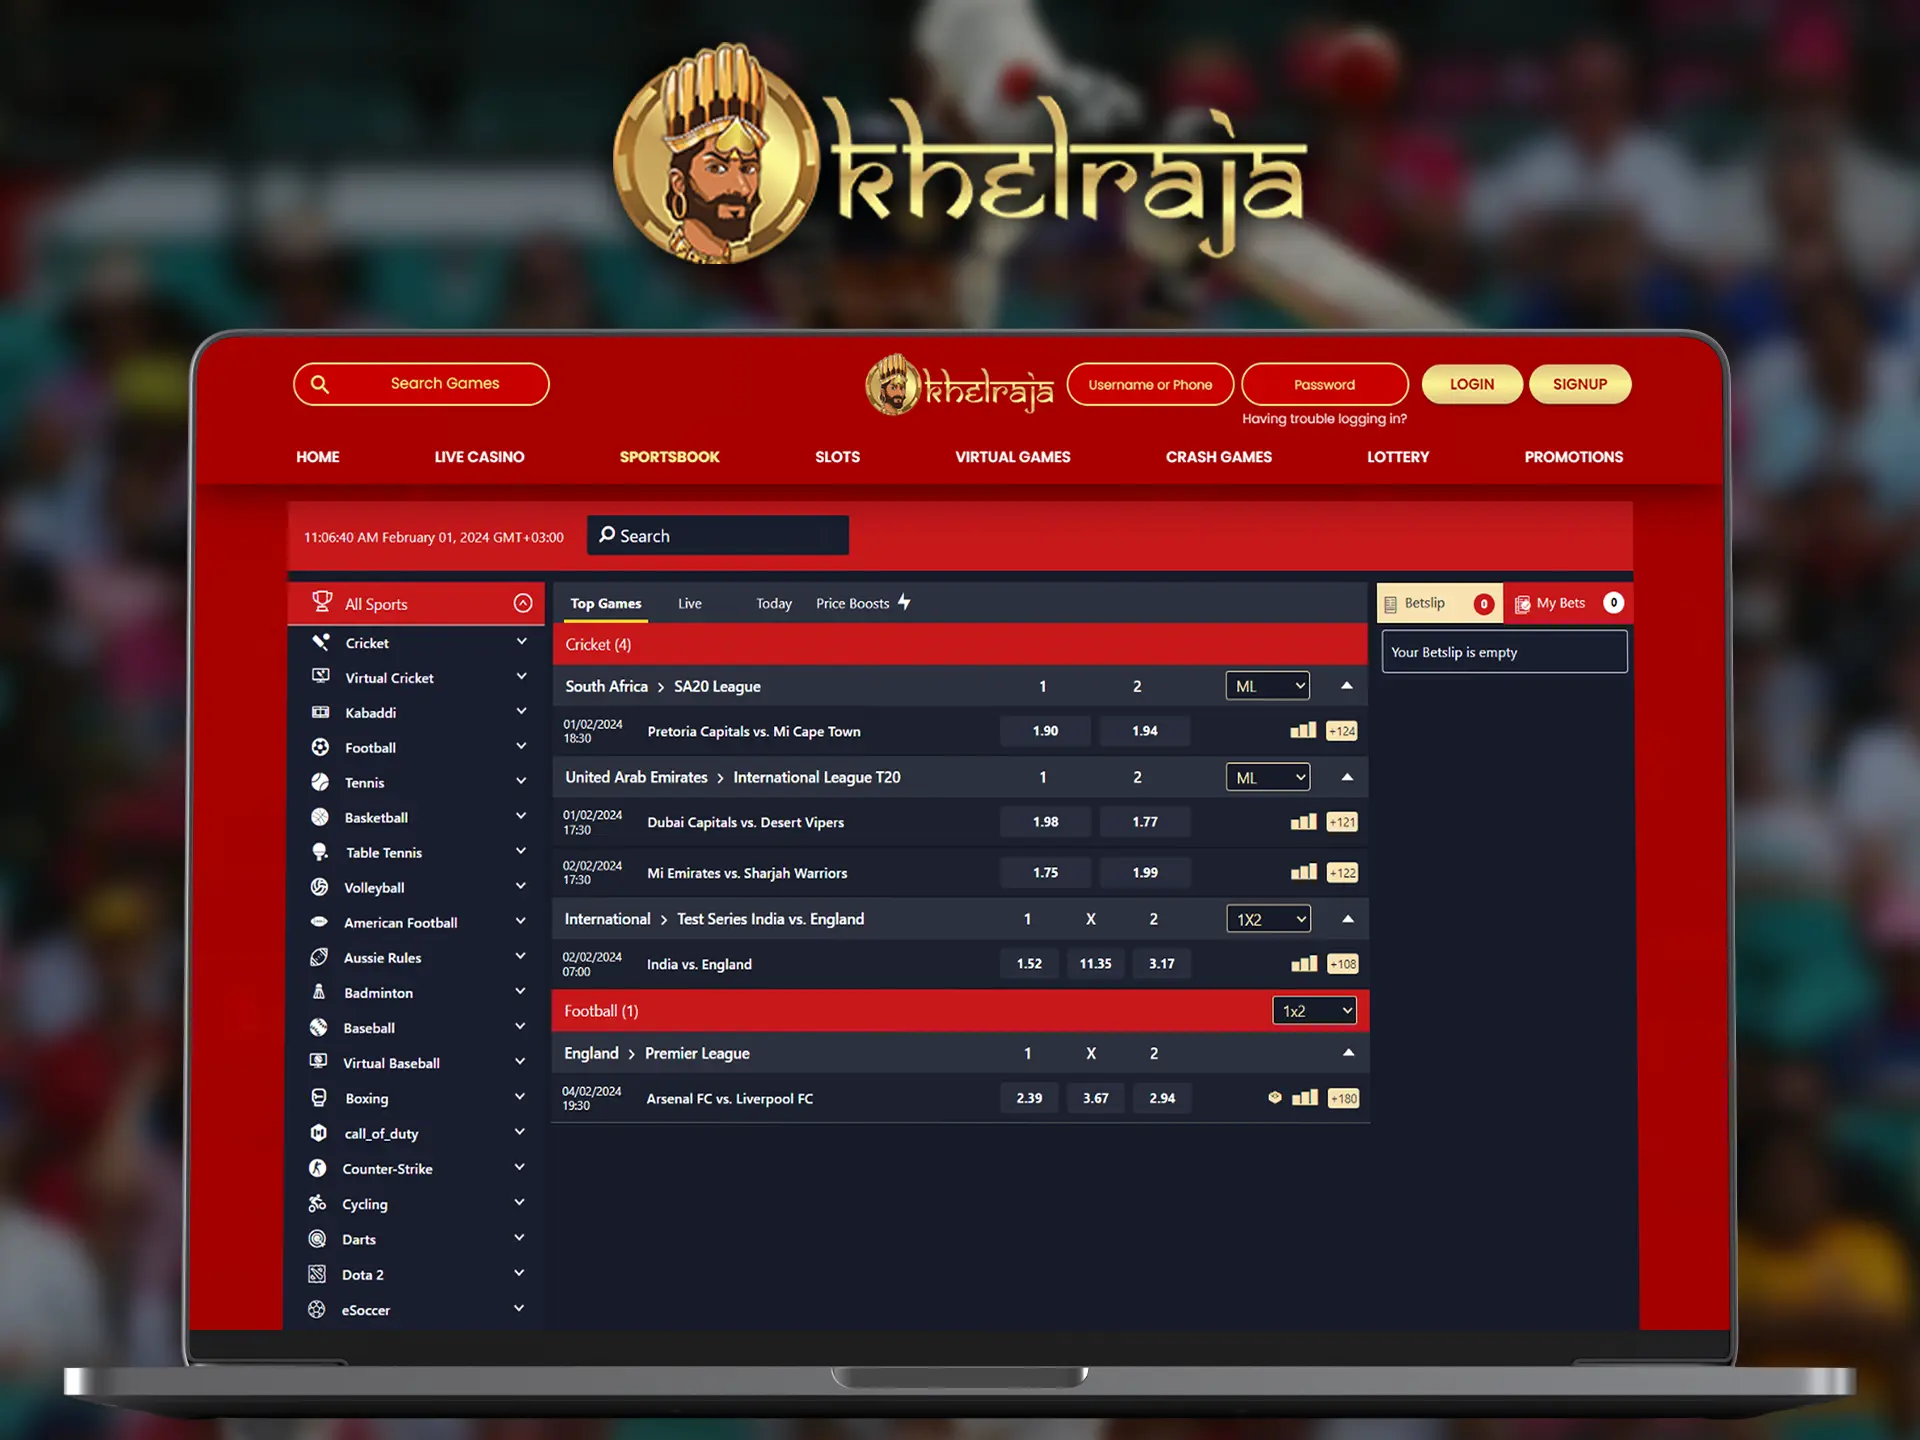 Khelraja offers betting on a multitude of sports, games, events and a generous 300% welcome bonus.